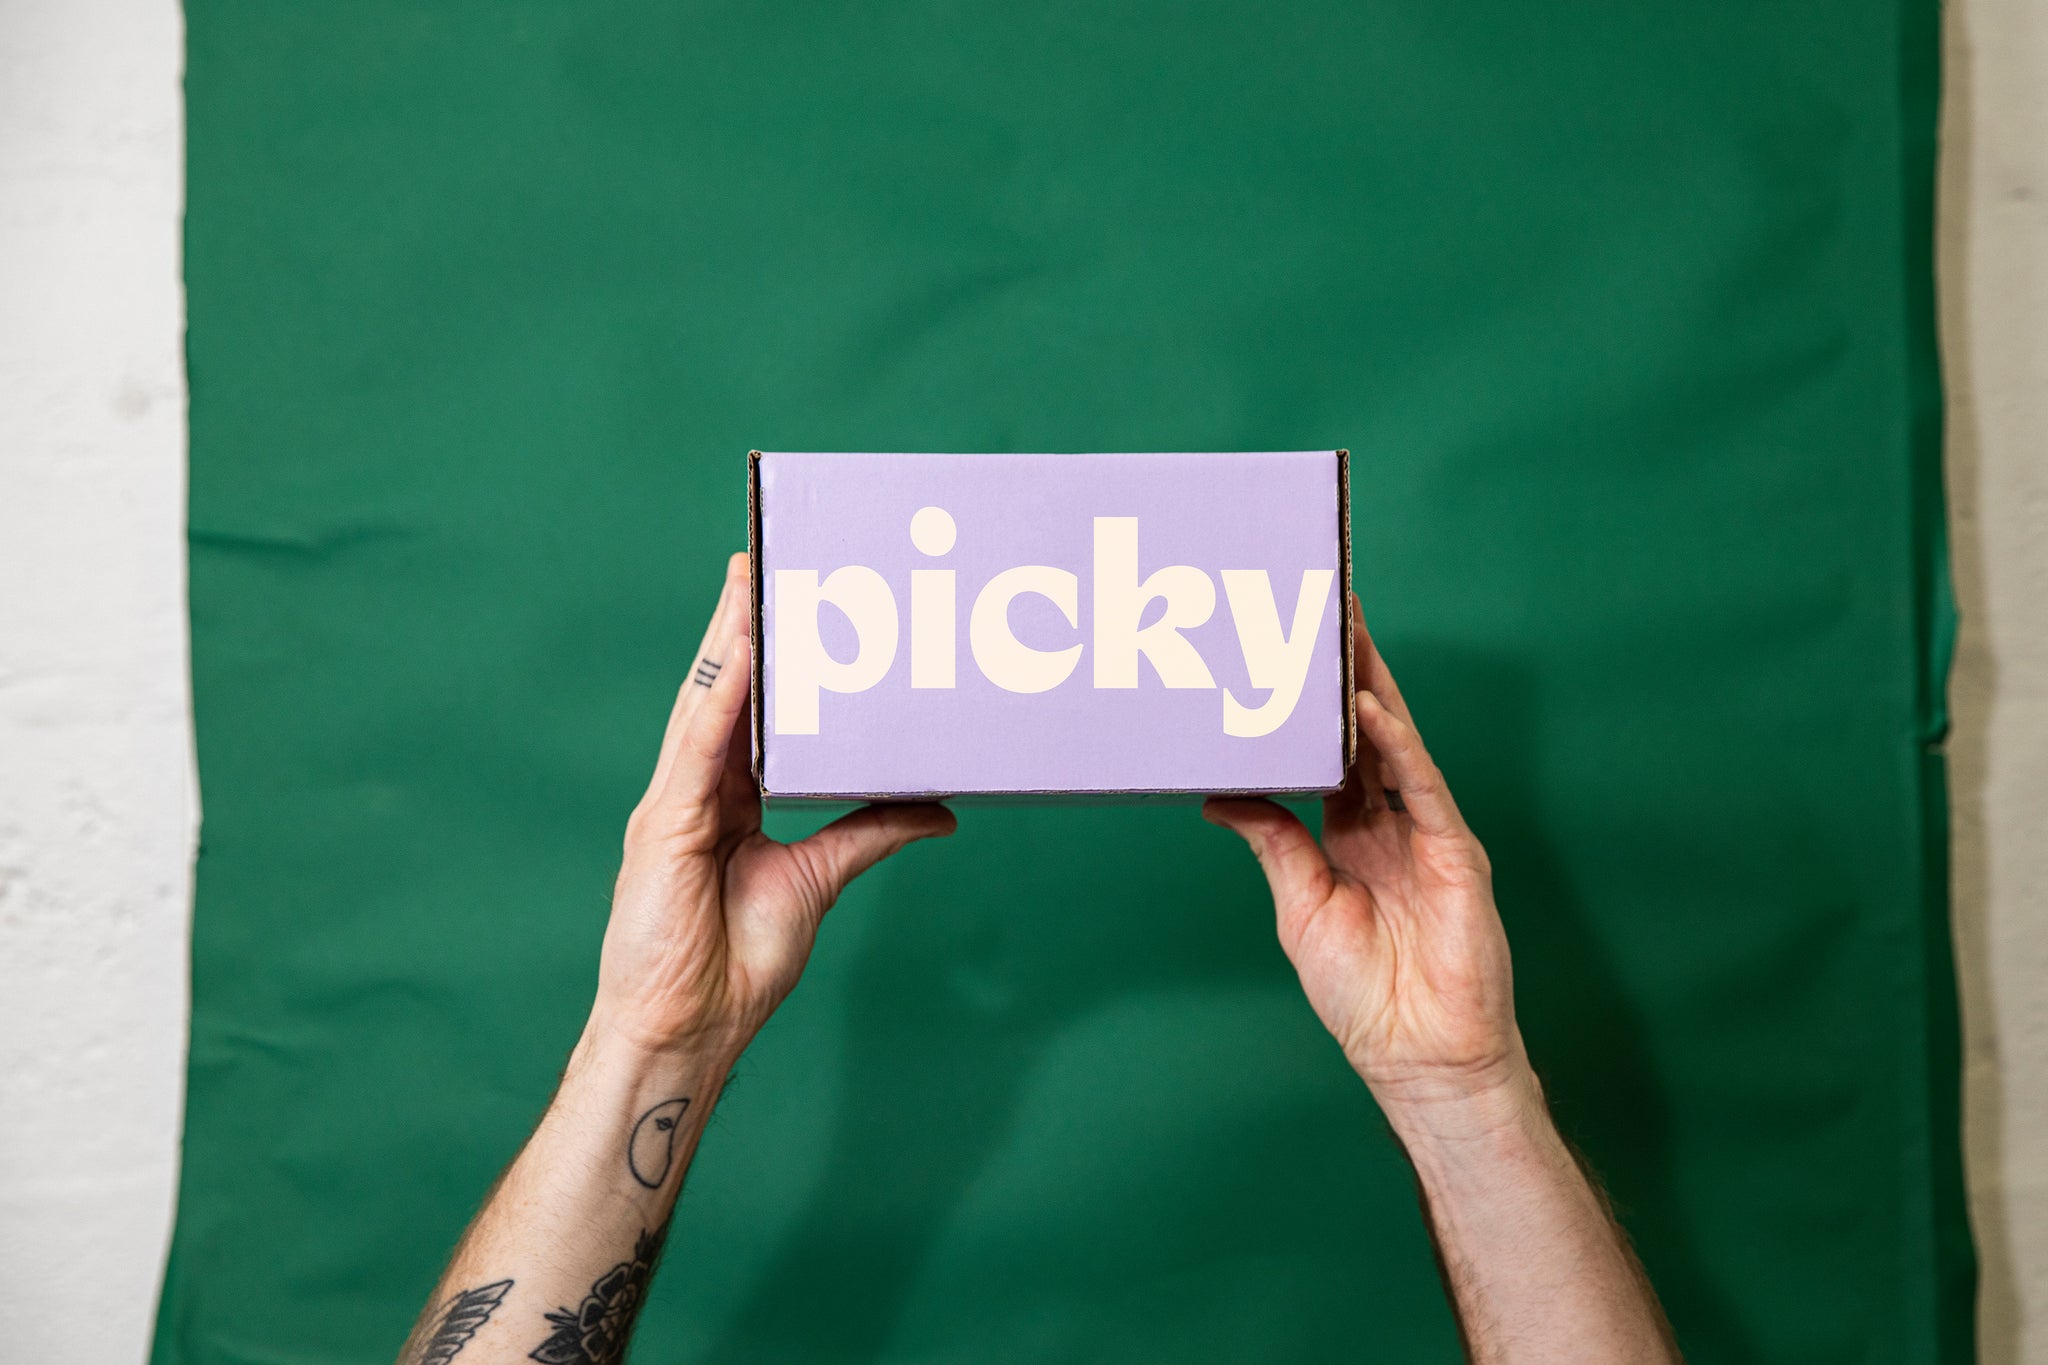 Tattooed hand holding up a box of cans. Green fabric background. The box is purple with the words Picky written on the front in a large white font.  